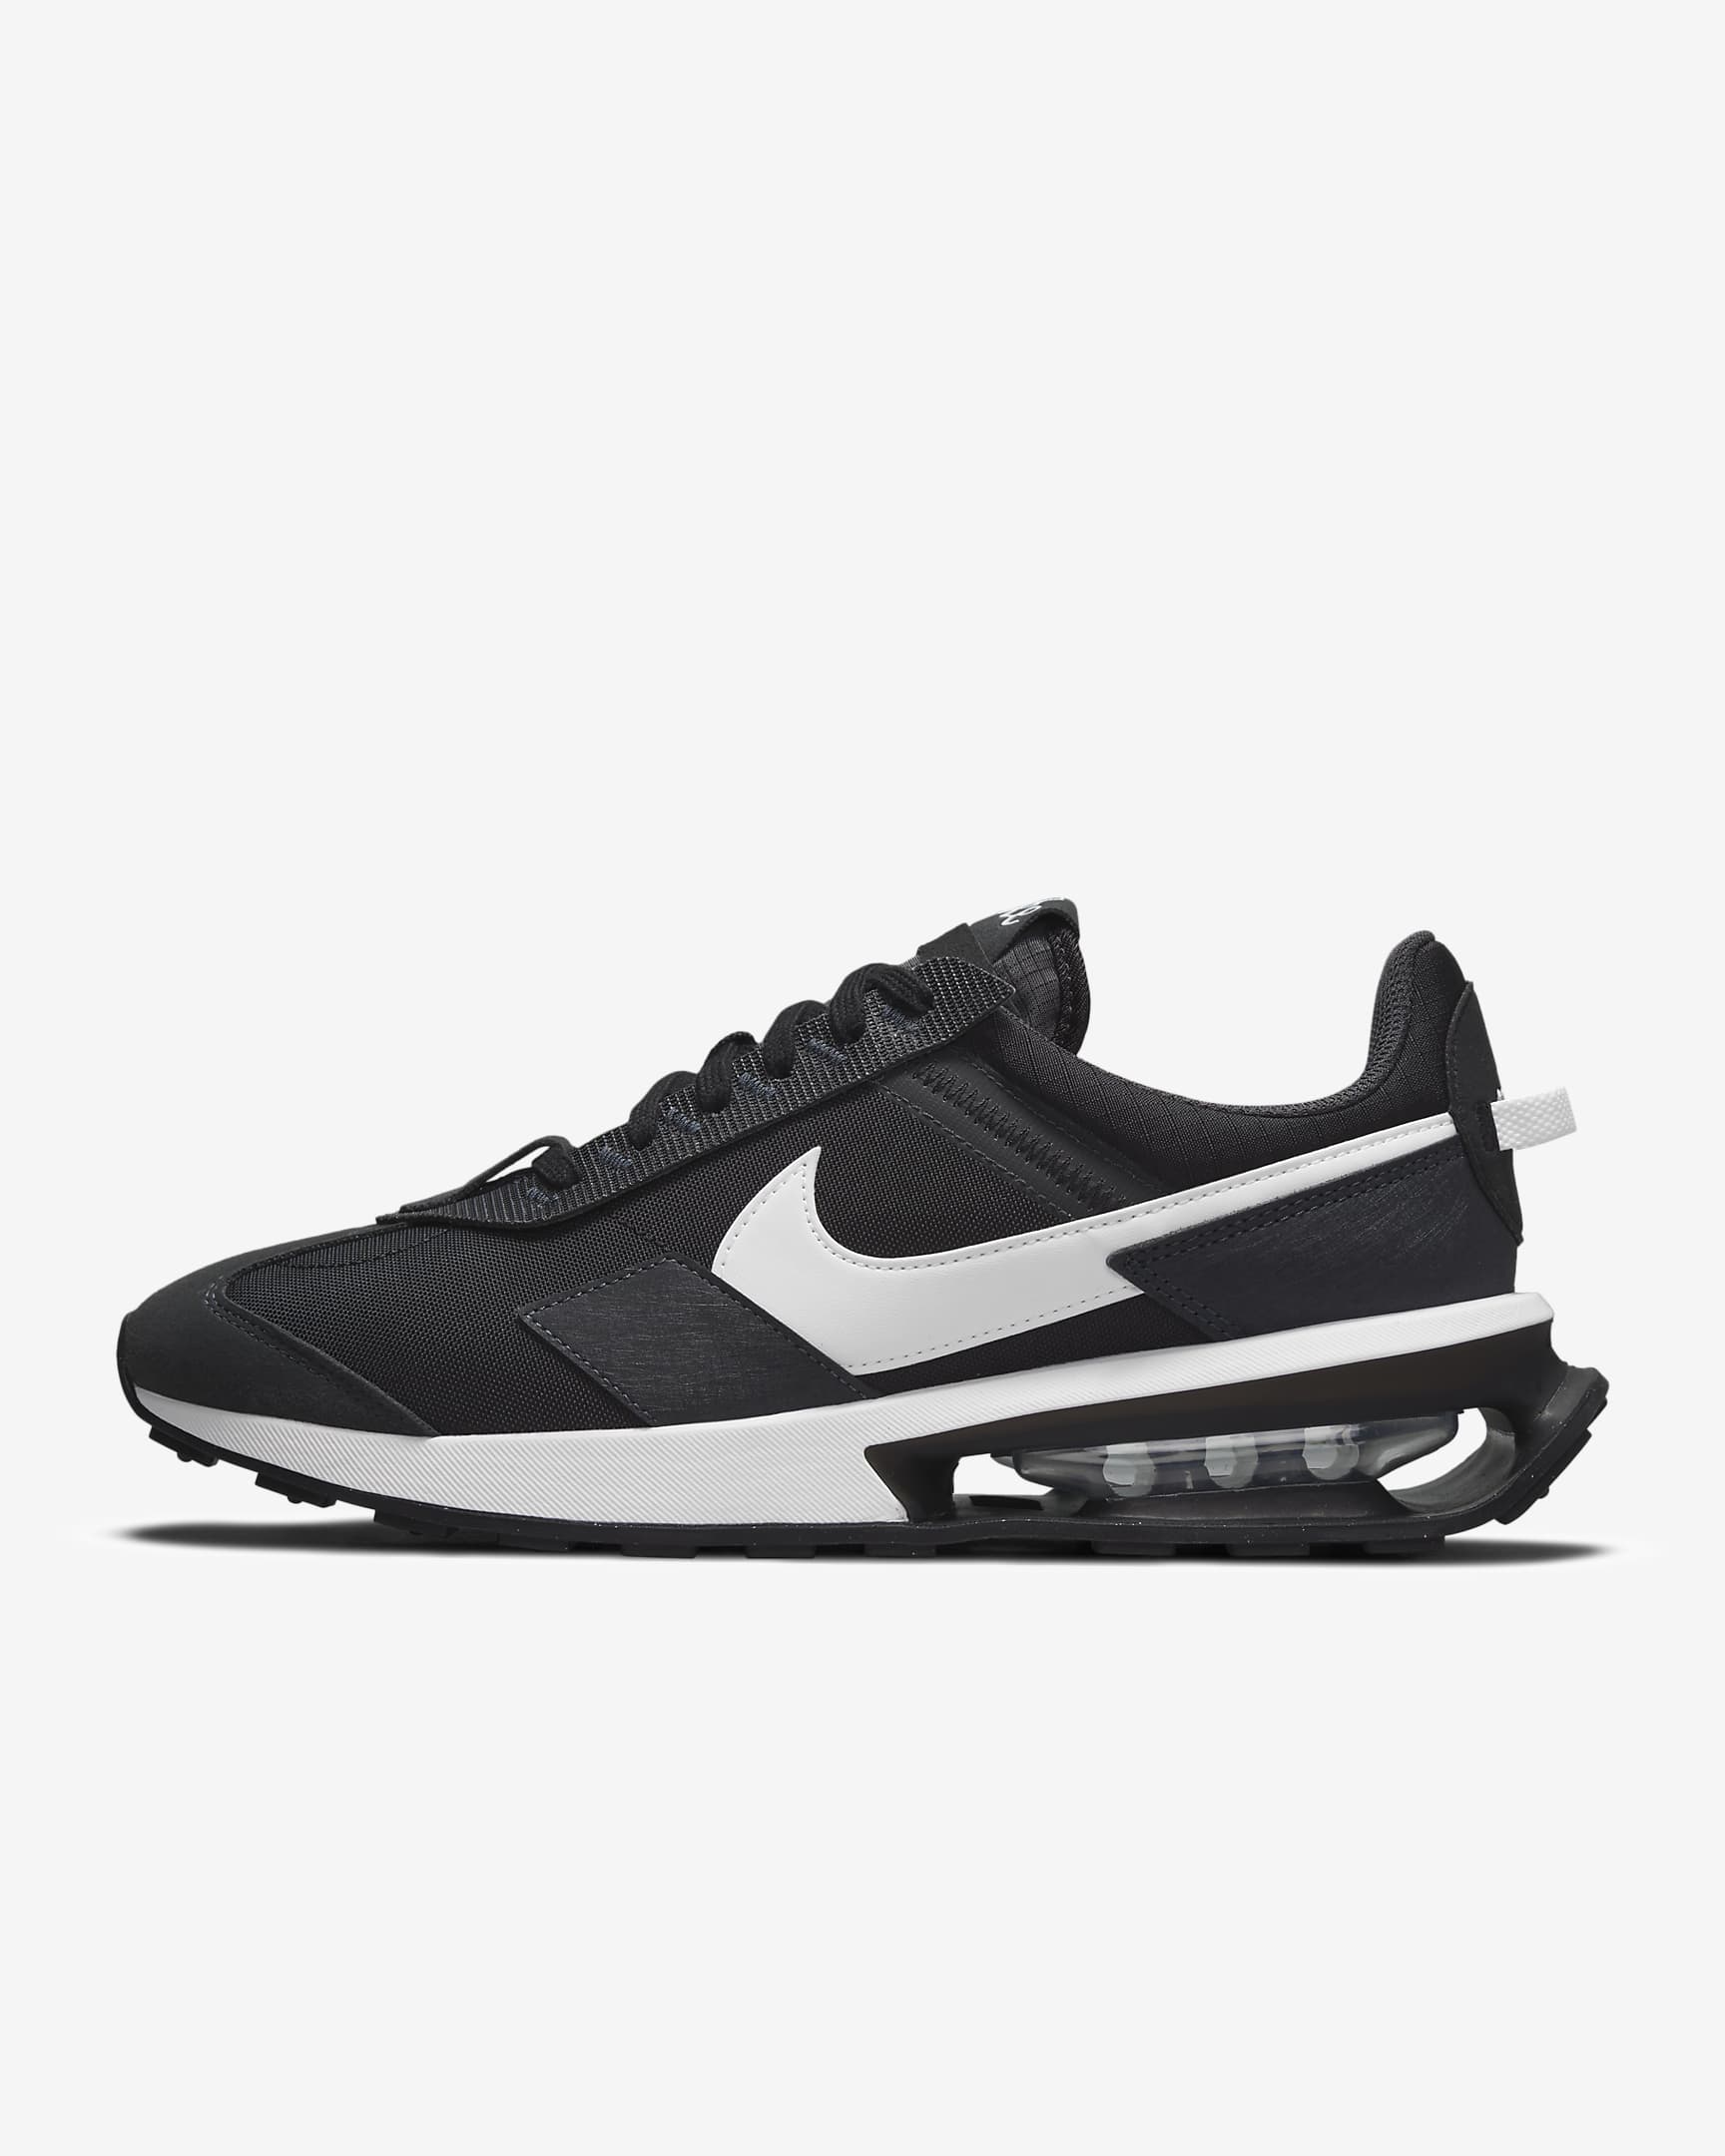 Nike Air Max Pre-Day Men's Shoes - Black/Anthracite/White